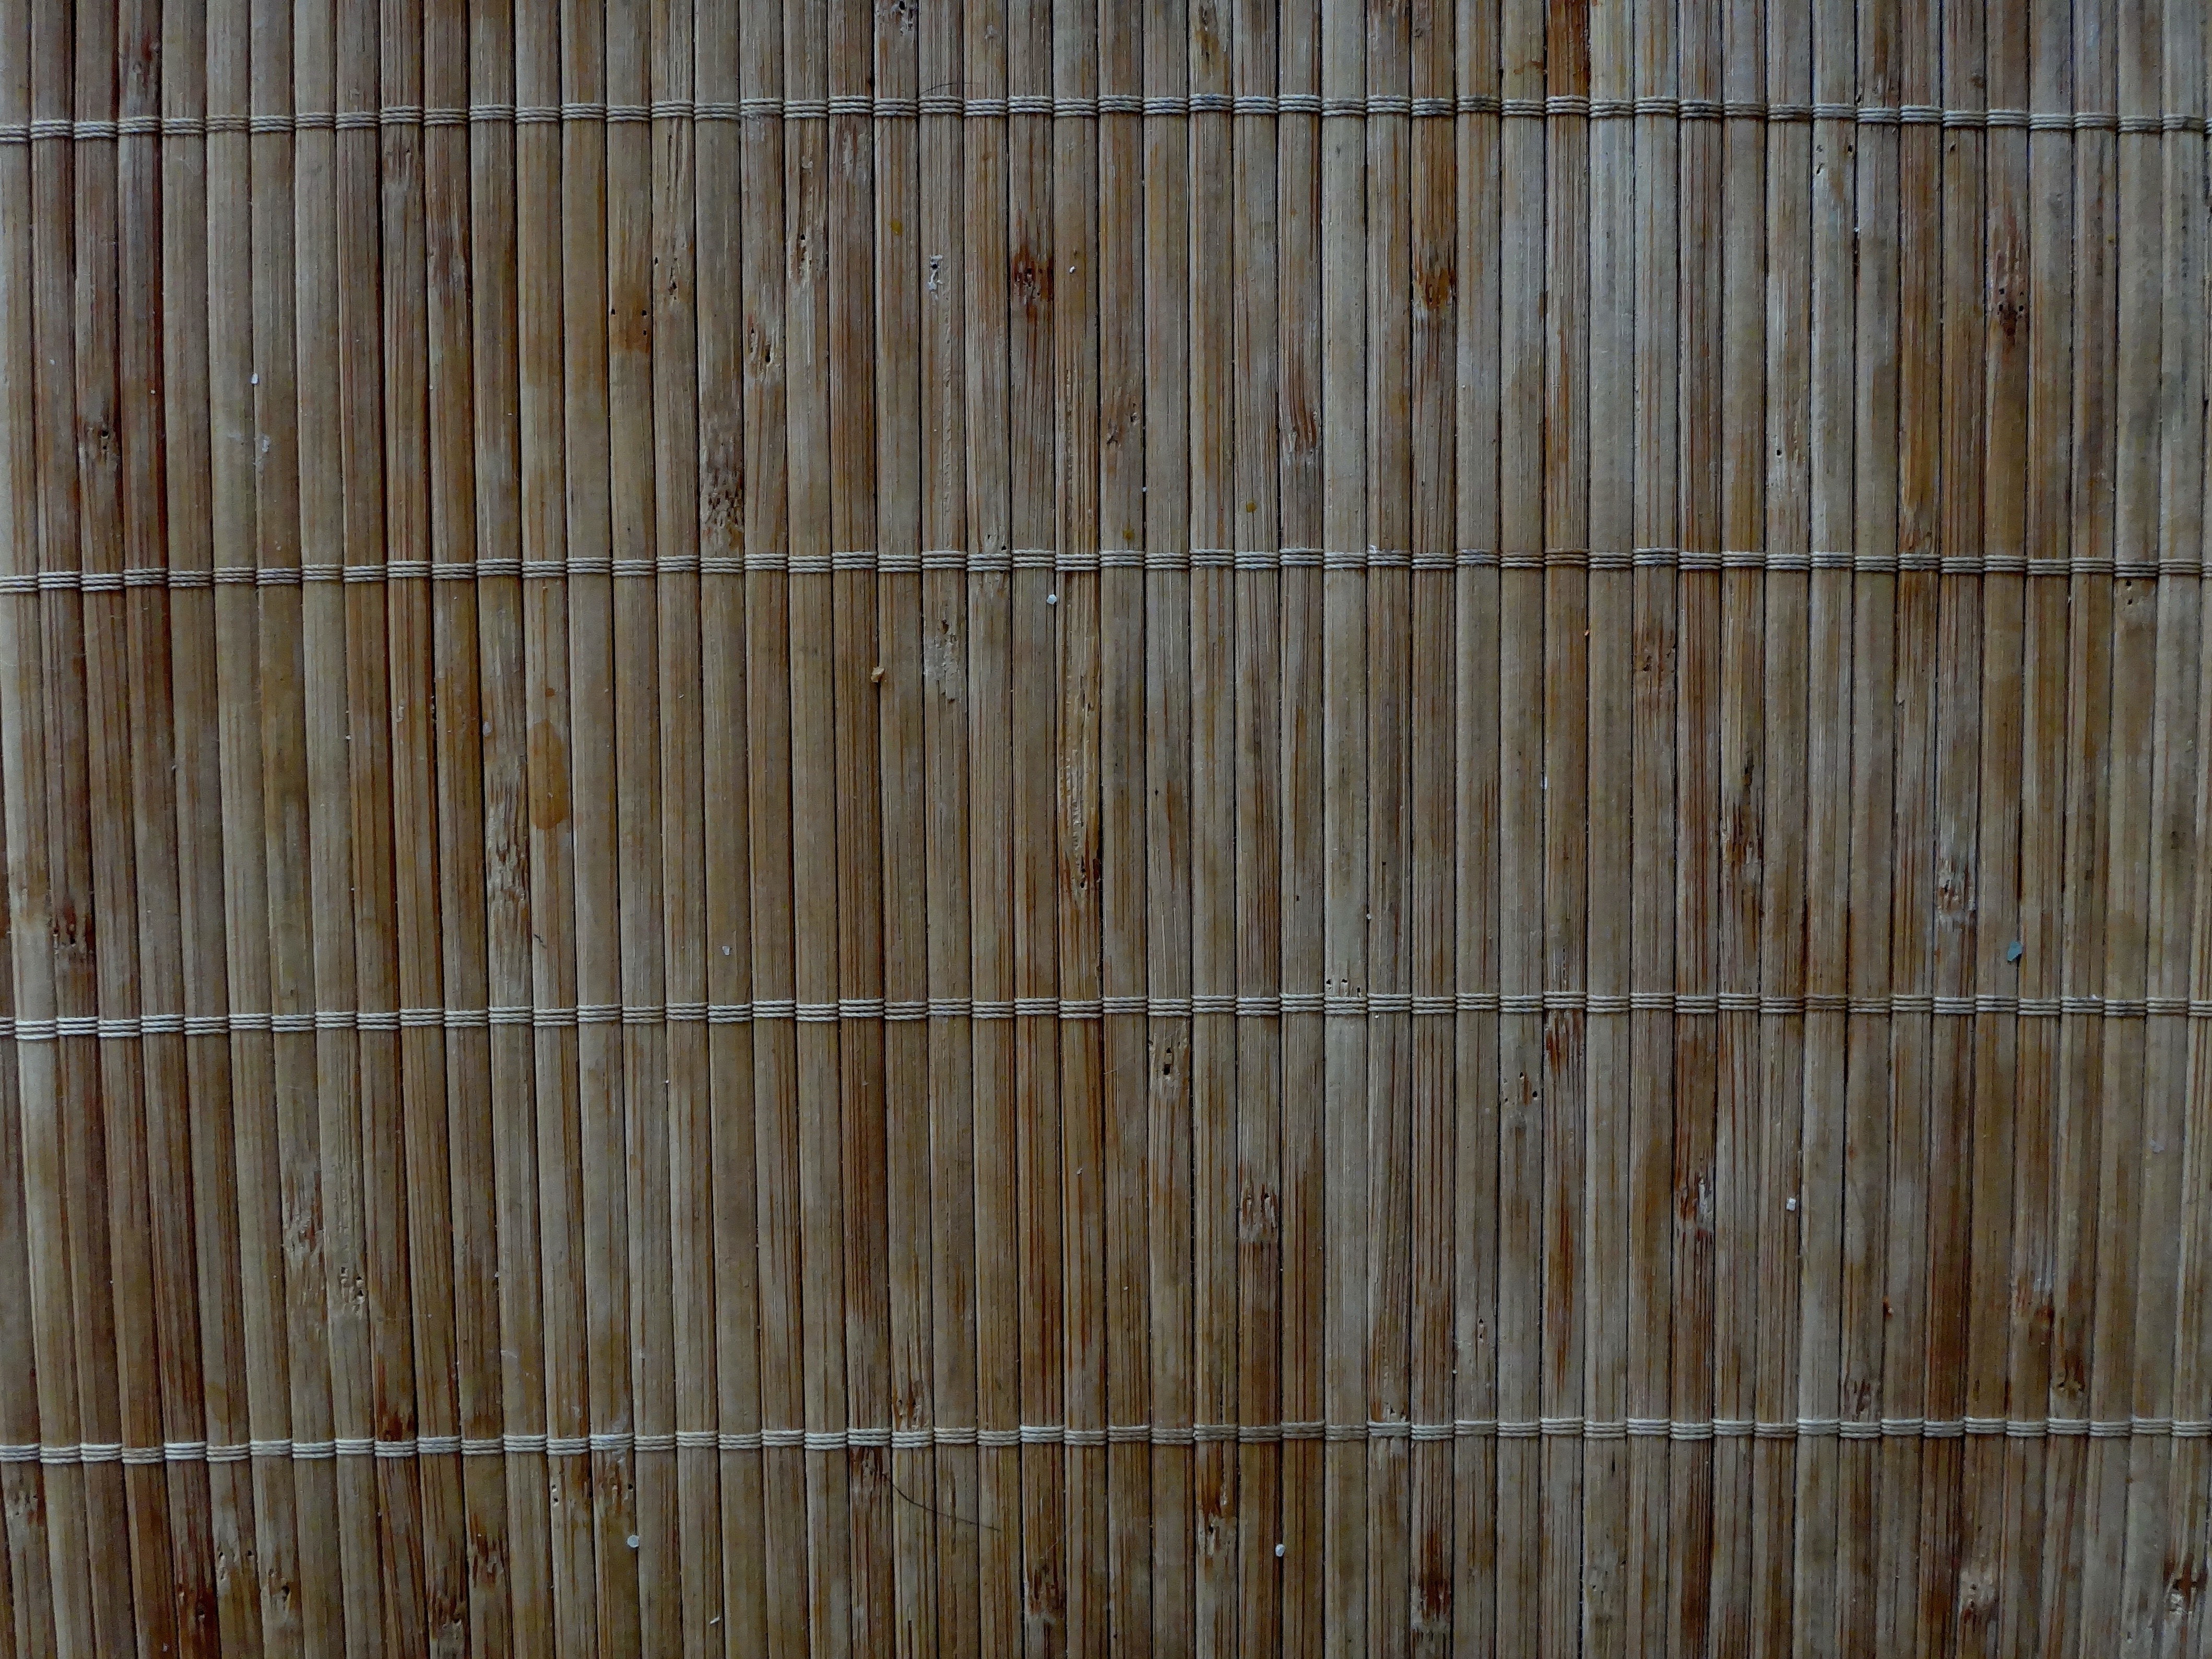 brown and beige wooden bamboo fence